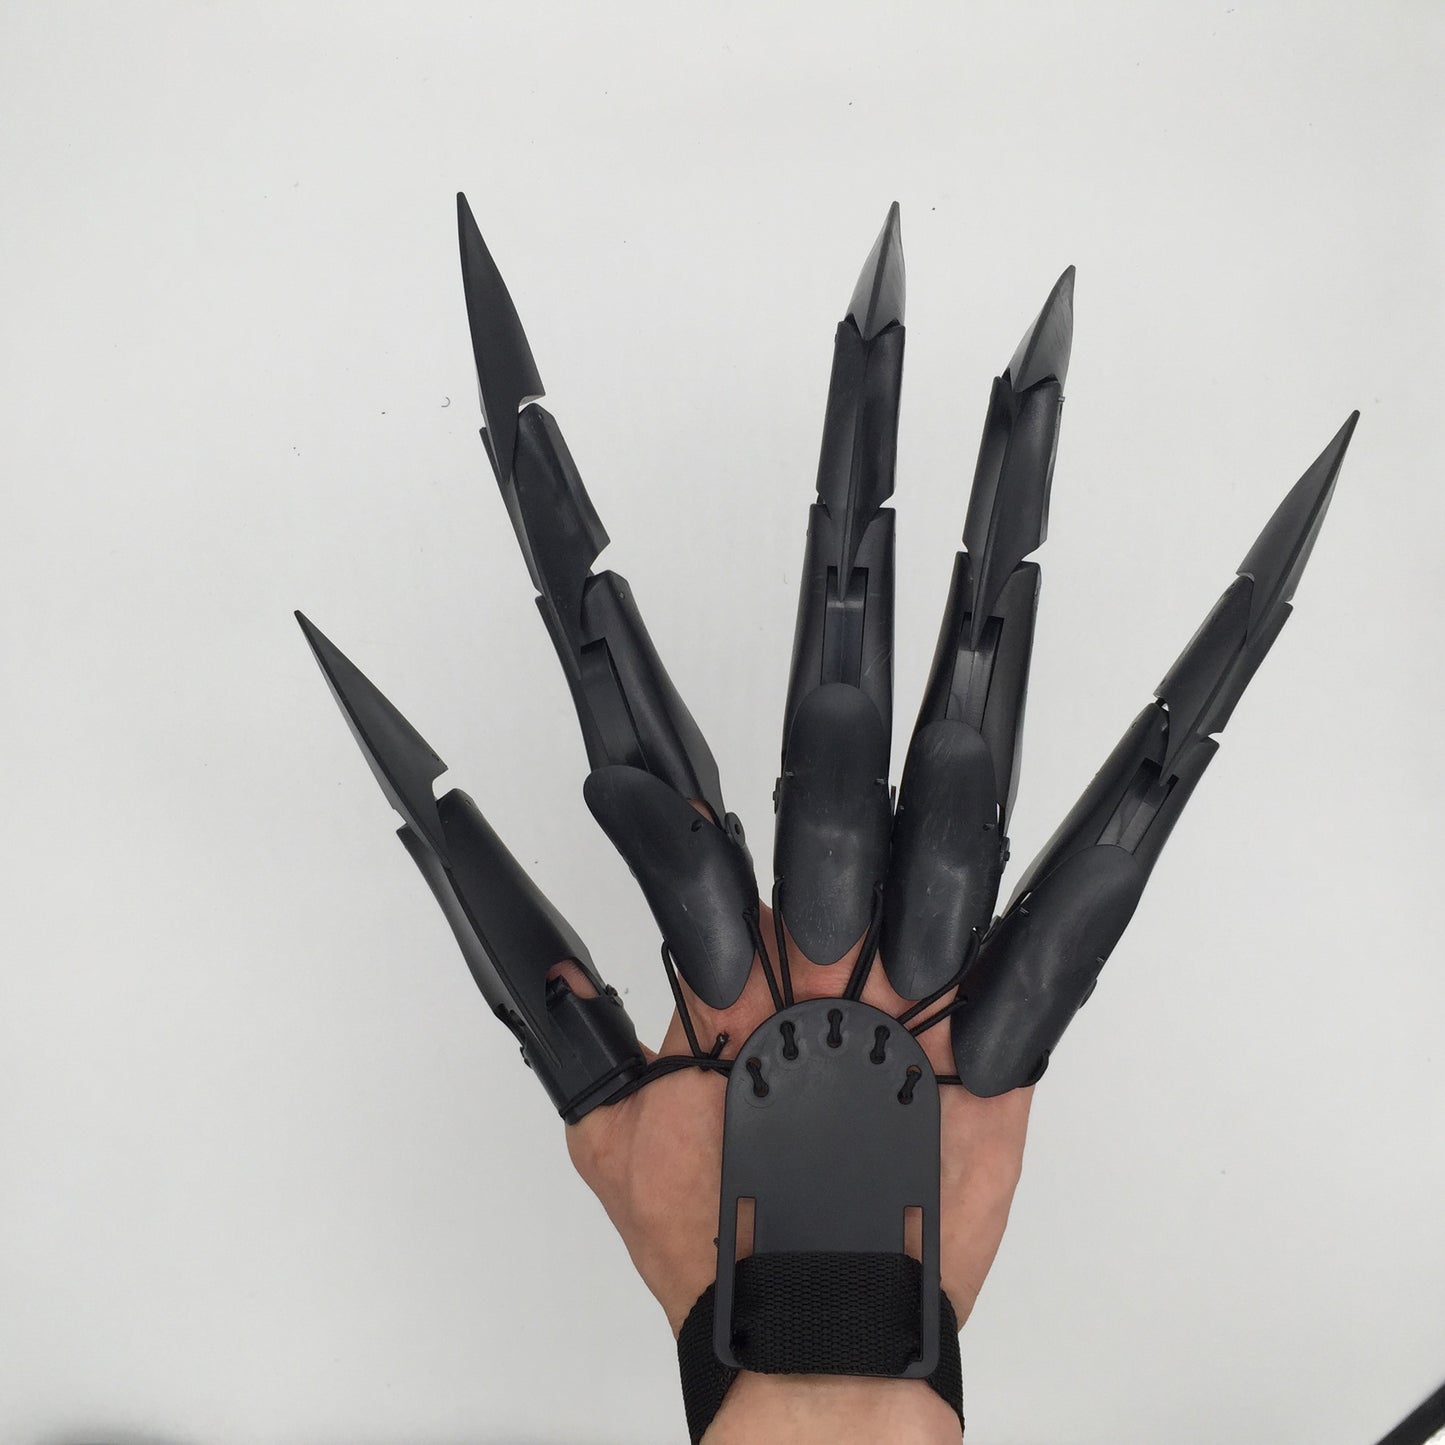 New Halloween Articulated Fingers Finger Joint Outdoor Party Decoration